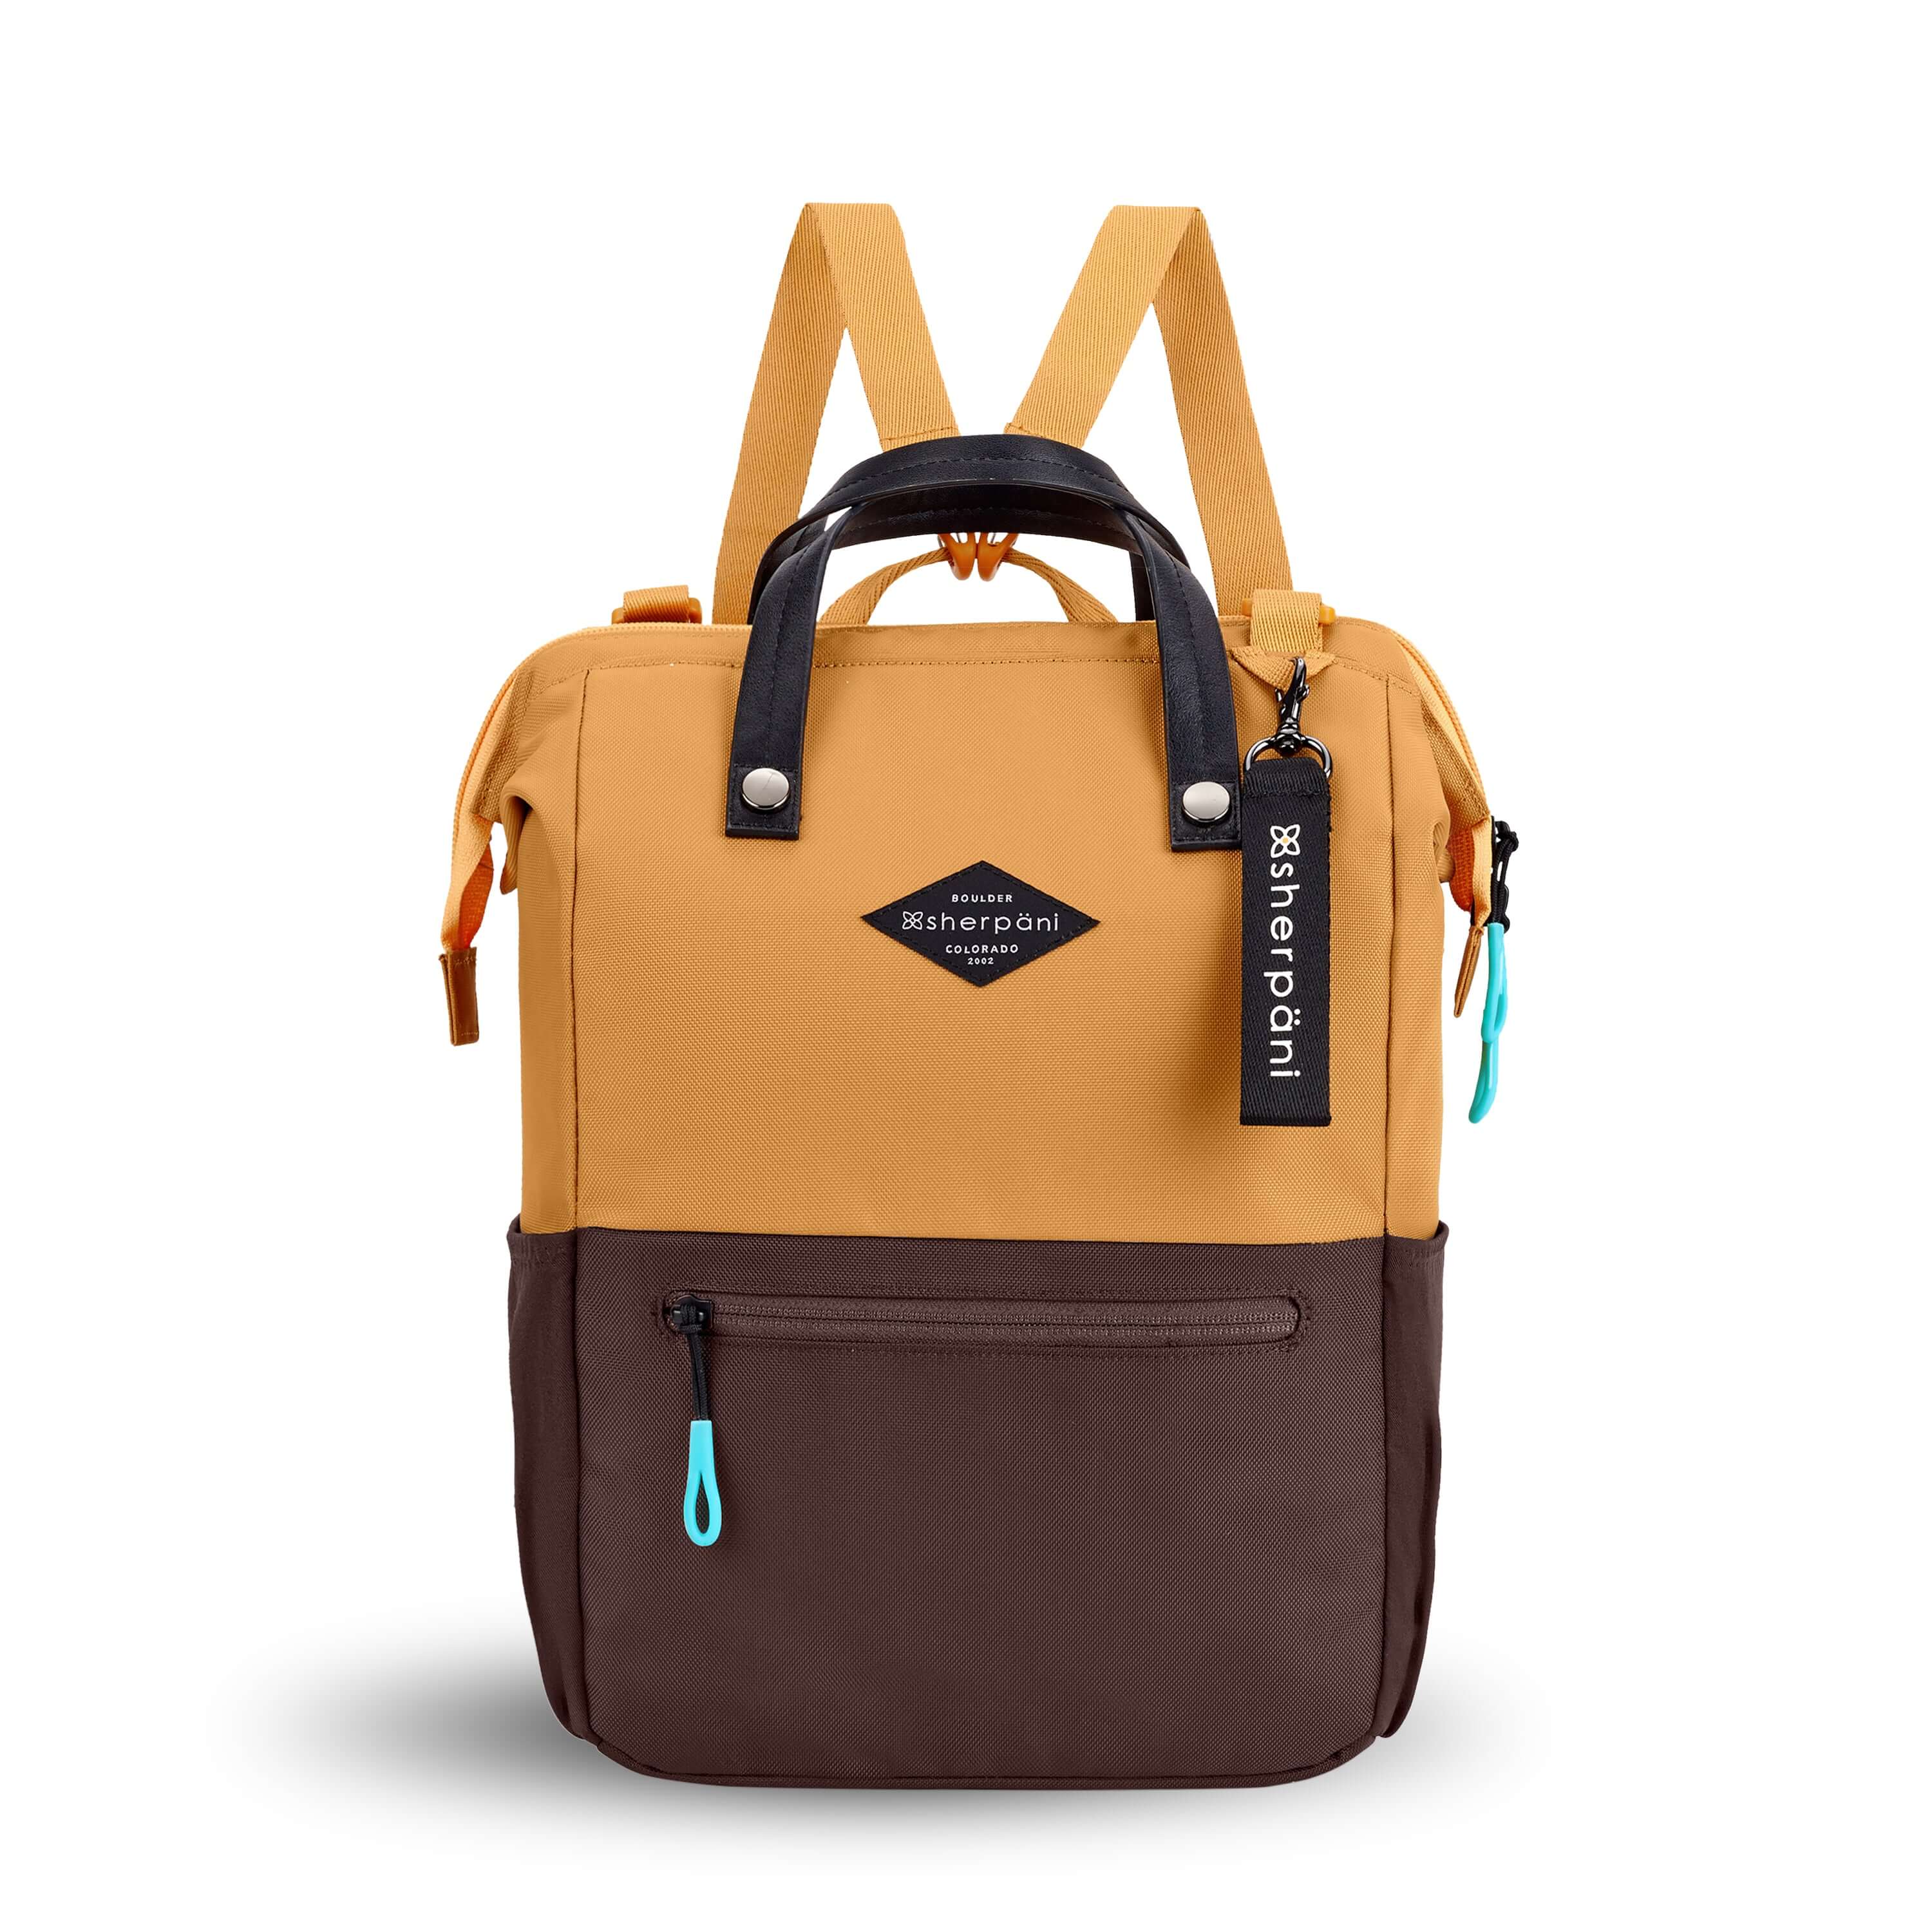 Flat front view of Sherpani three in one bag, the Dispatch in Sundial. The bag is two toned: the top is burnt yellow and the bottom is brown. There is an external zipper pocket on the front panel. Easy pull zippers are accented in aqua. A branded Sherpani keychain is clipped to the upper right corner. Elastic water bottle holders sit on either side of the bag. It has short tote handles and adjustable/detachable straps that can function for a backpack or crossbody. 